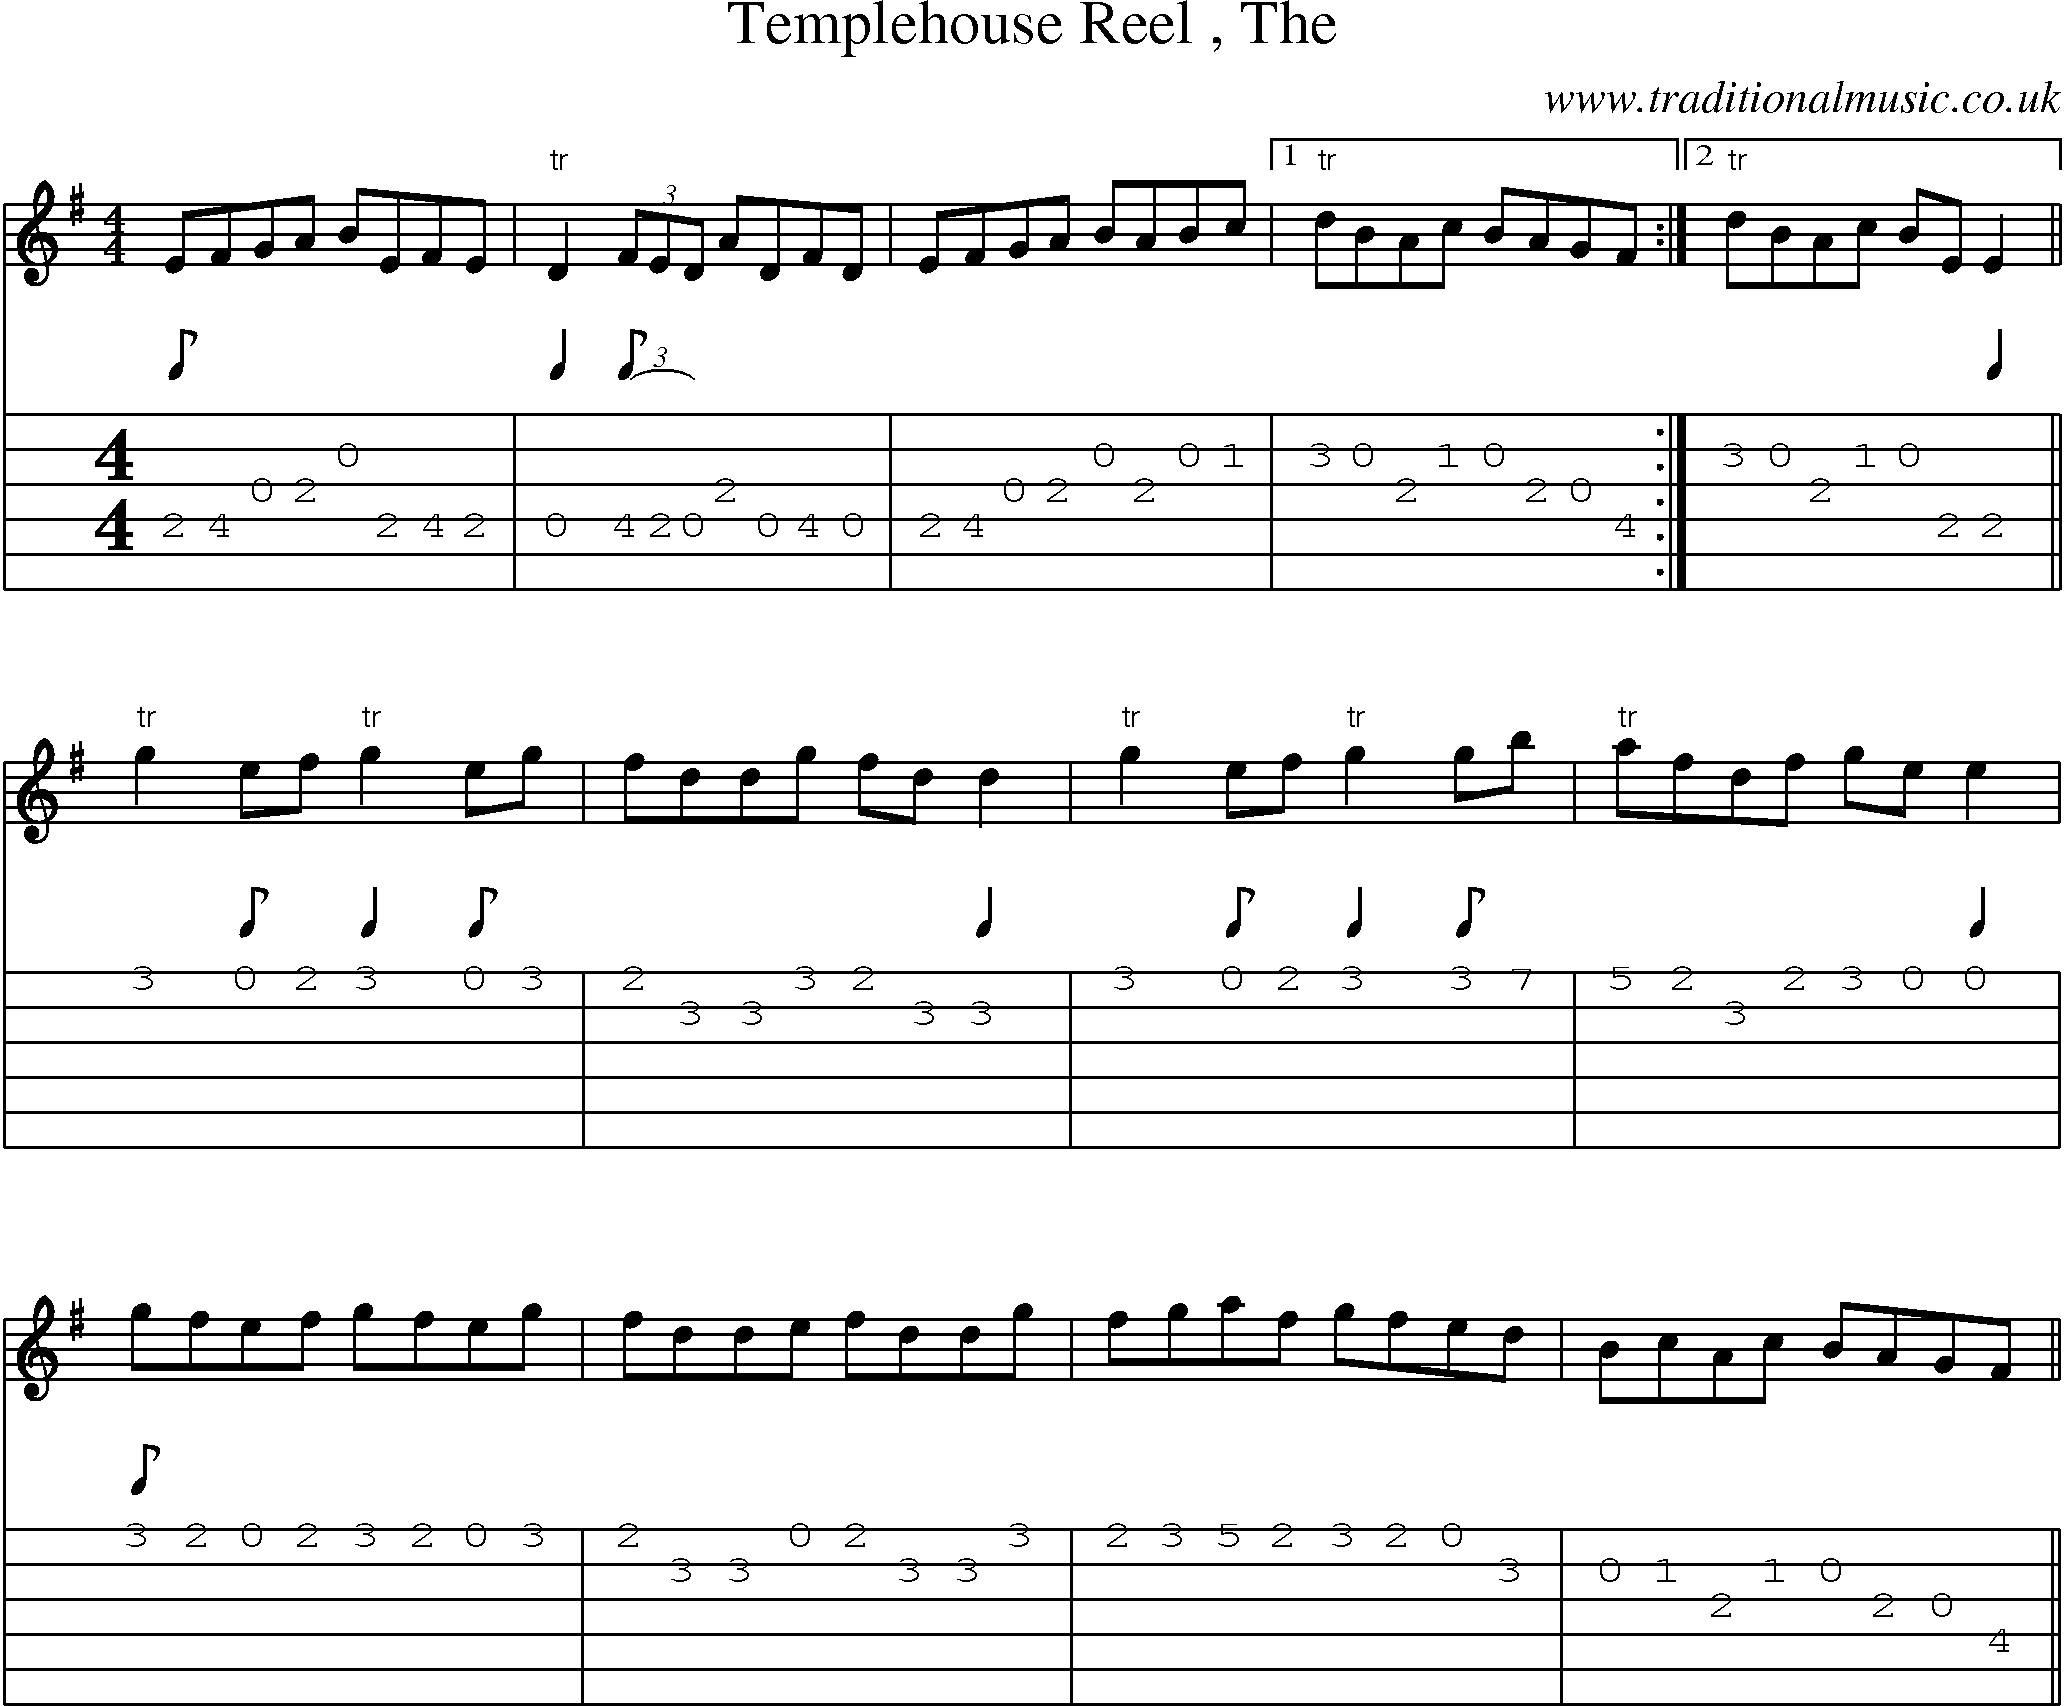 Music Score and Guitar Tabs for Templehouse Reel